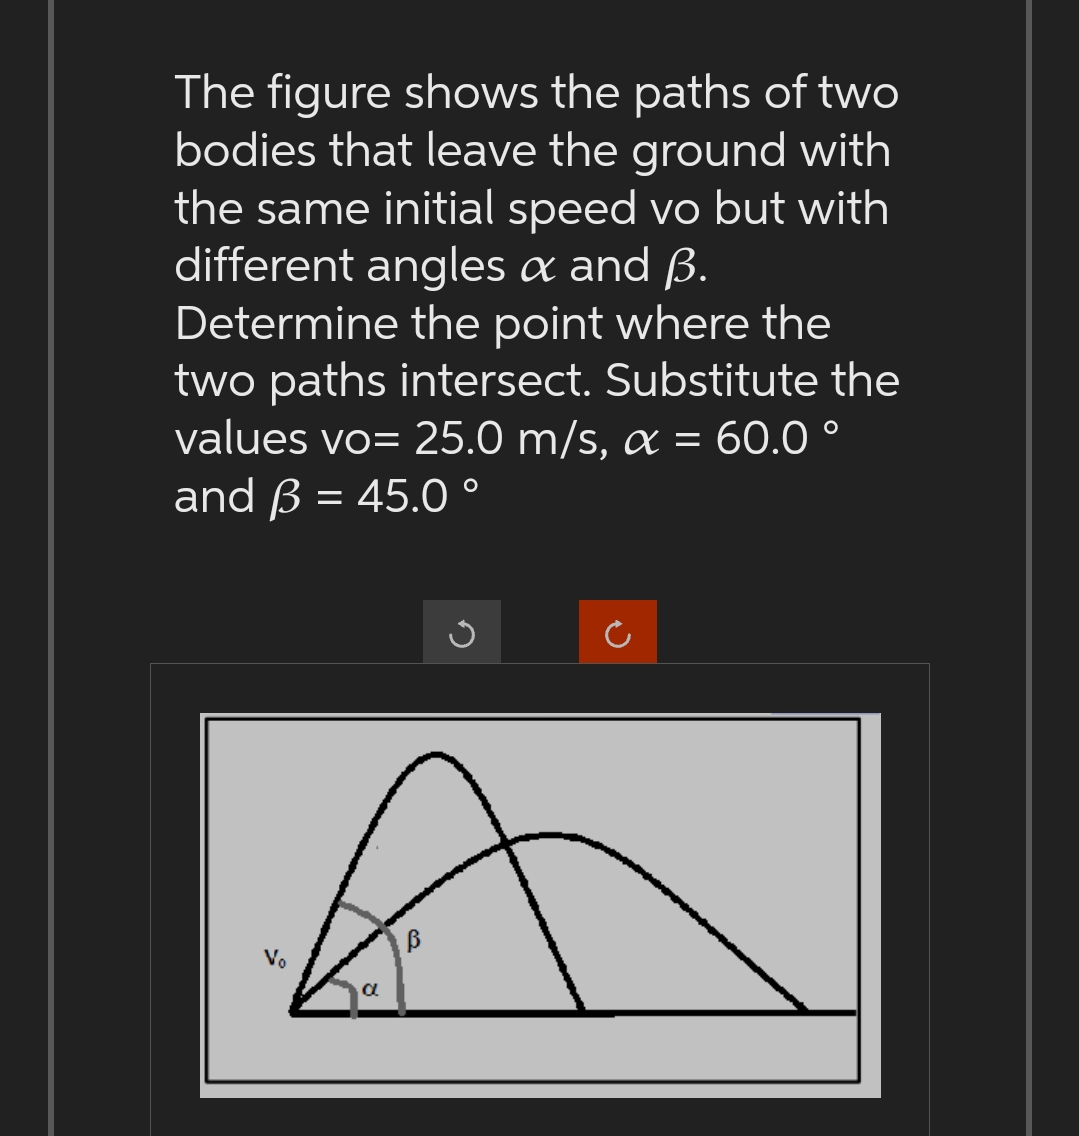 The figure shows the paths of two
bodies that leave the ground with
the same initial speed vo but with
different angles & and B.
Determine the point where the
two paths intersect. Substitute the
values vo= 25.0 m/s, a = 60.0°
and B = 45.0°
Vo
a
B